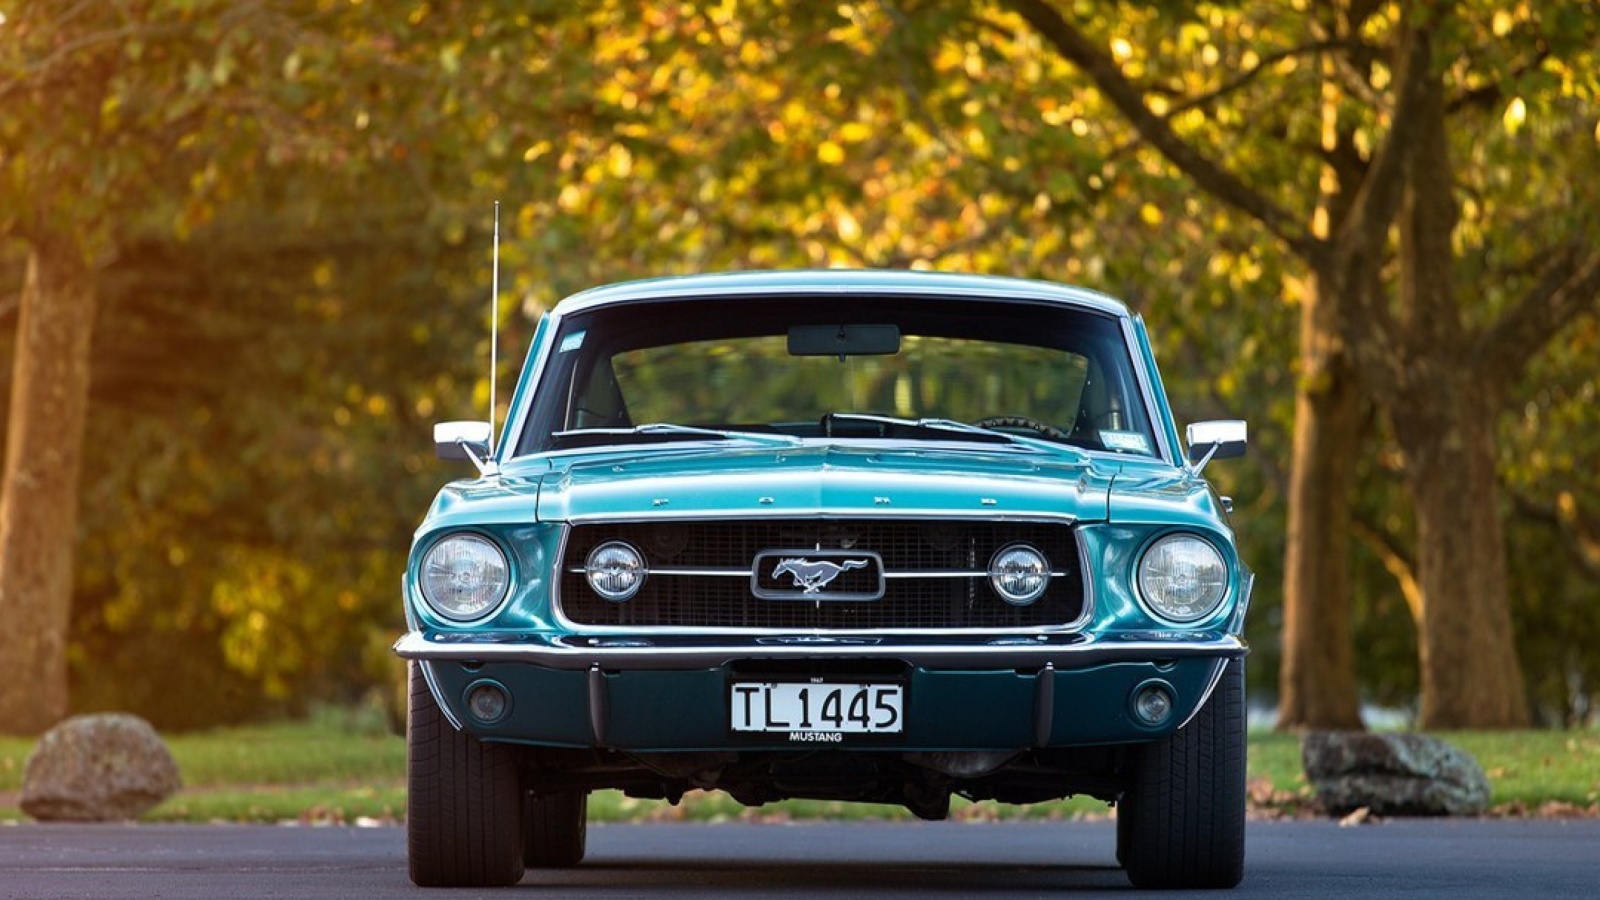 Ford Mustang First Generation wallpaper 1600x900